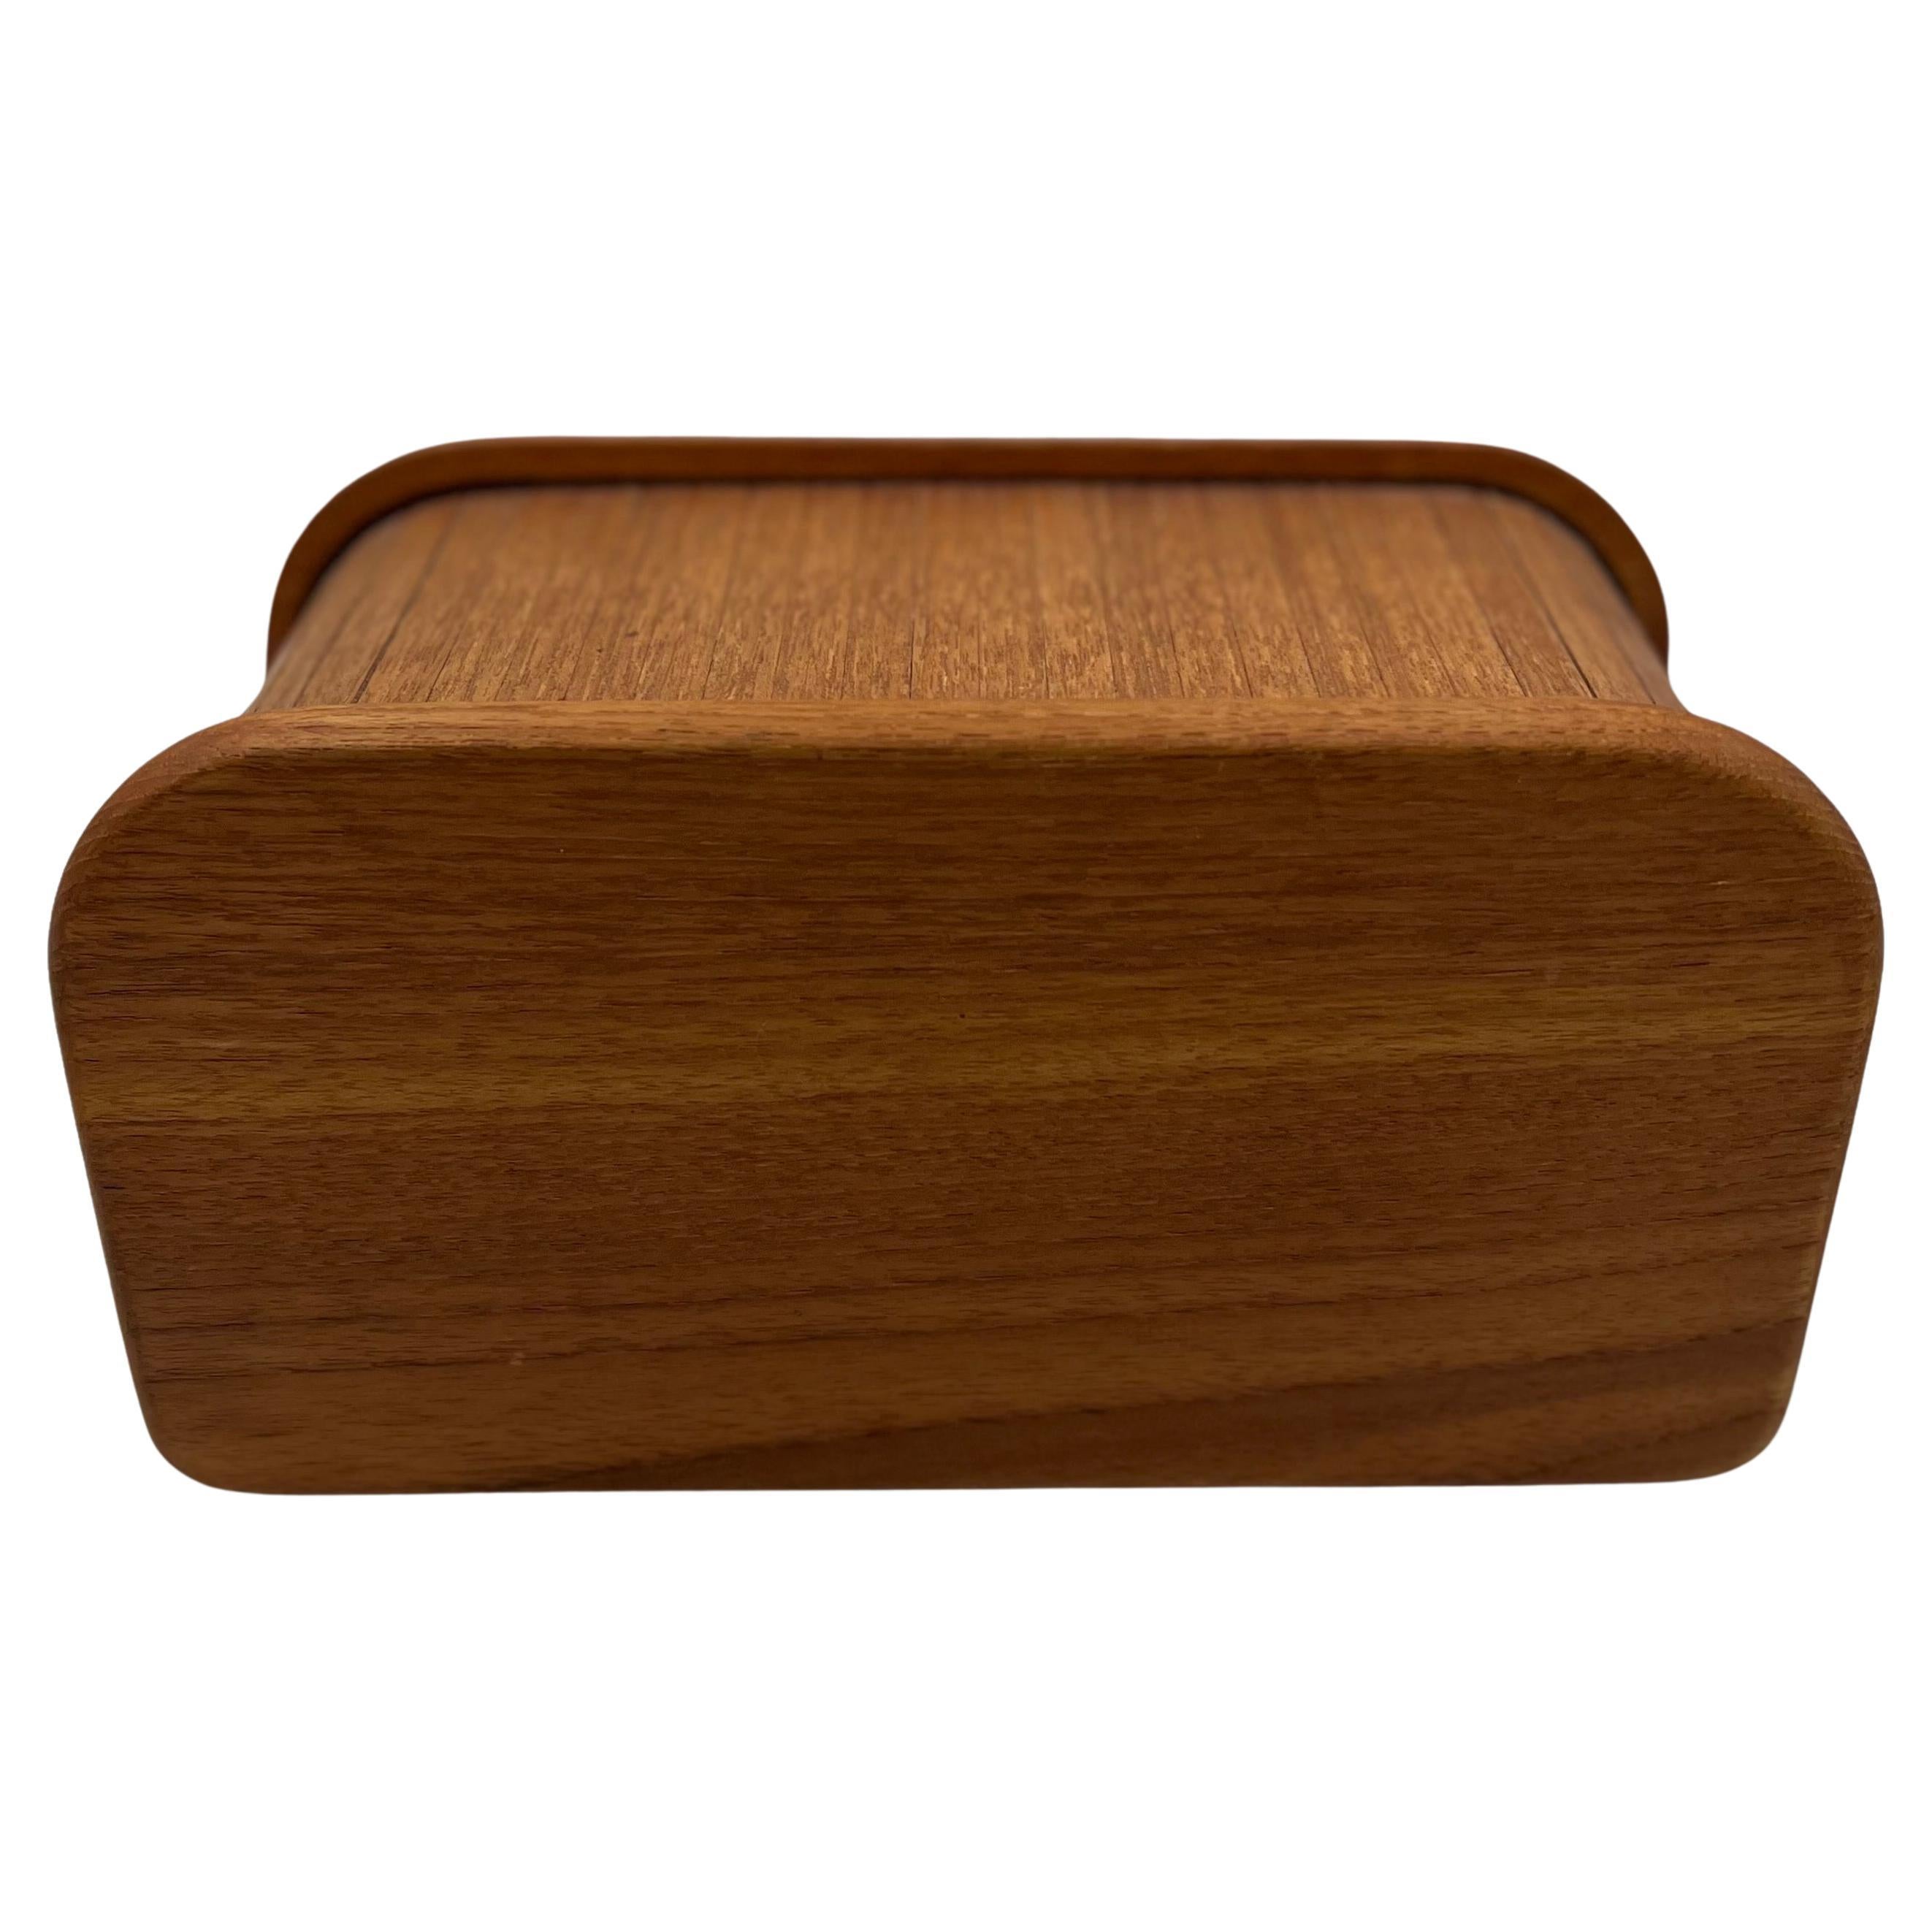 Small Danish modern solid teak tambour door trinket box, circa the 1970s. This beautiful well crafted roll-top desk box is great for trinkets or storage. The piece is in very good vintage condition.